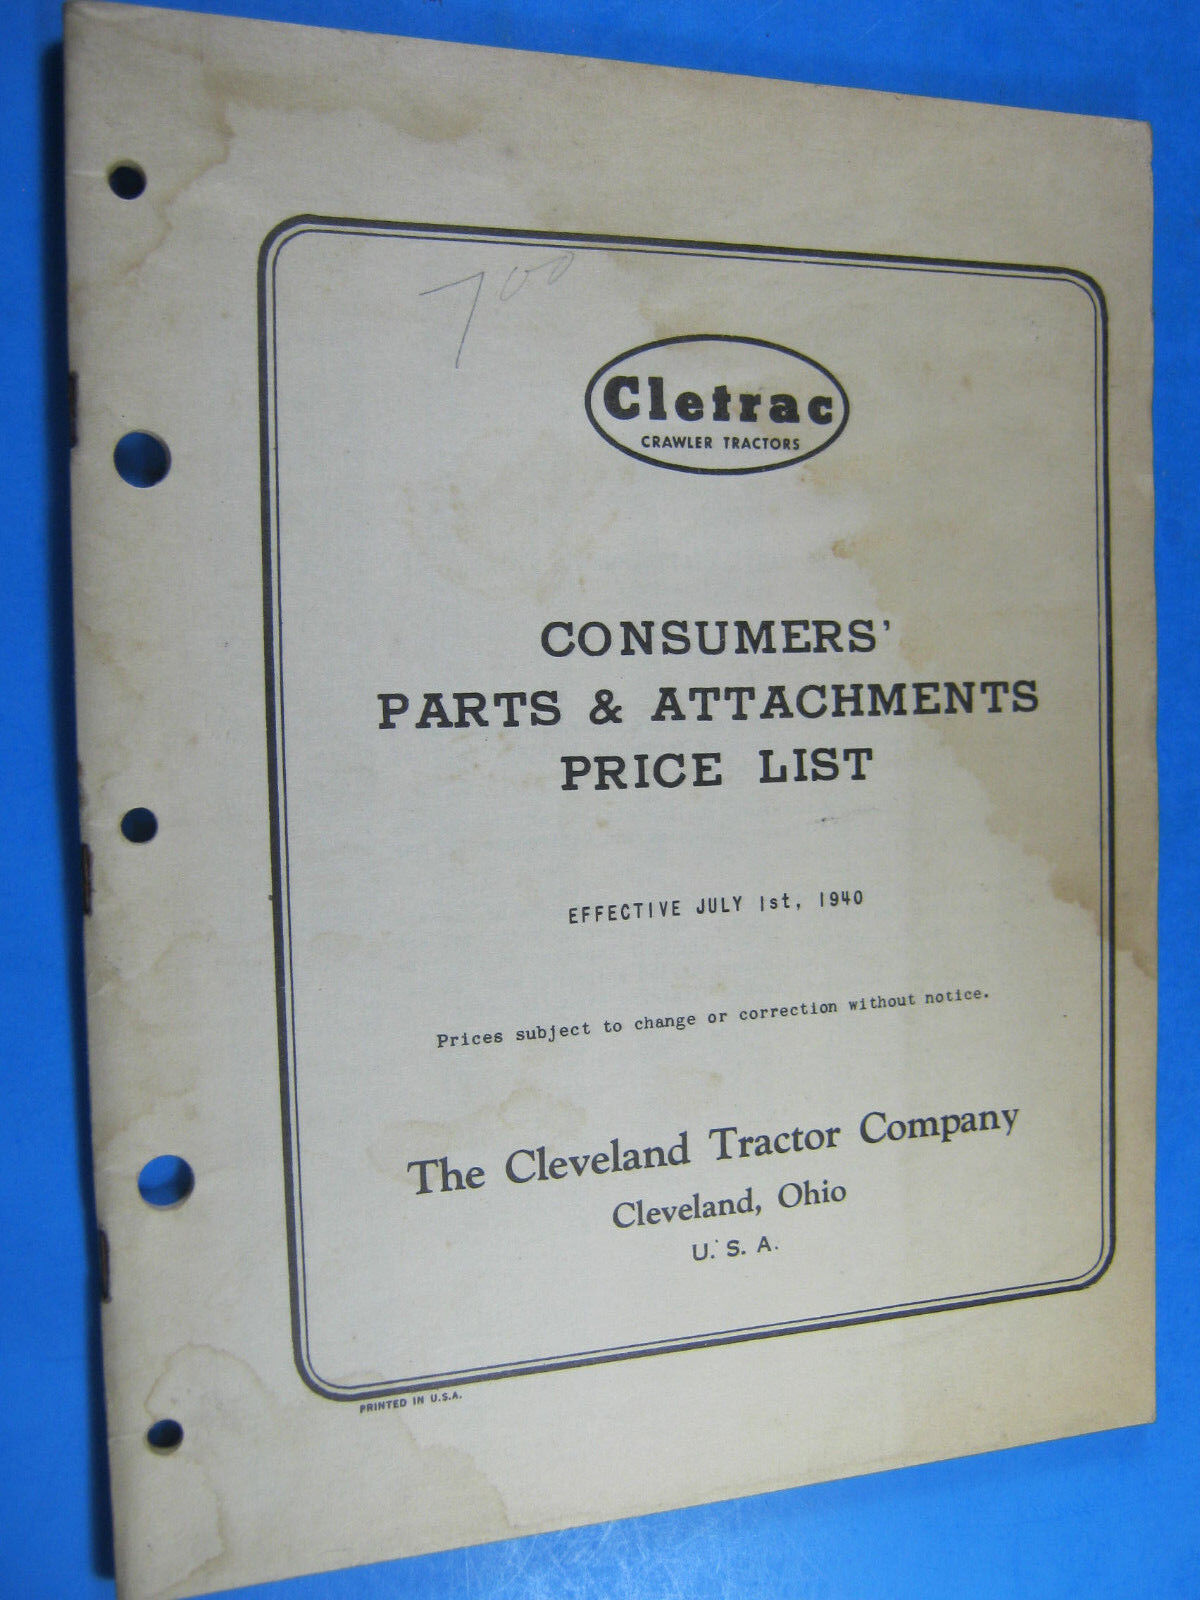 1940 CLETRAC CRAWLER TRACTOR CONSUMERS PARTS ATTACHMENT $$ PRICE LIST 